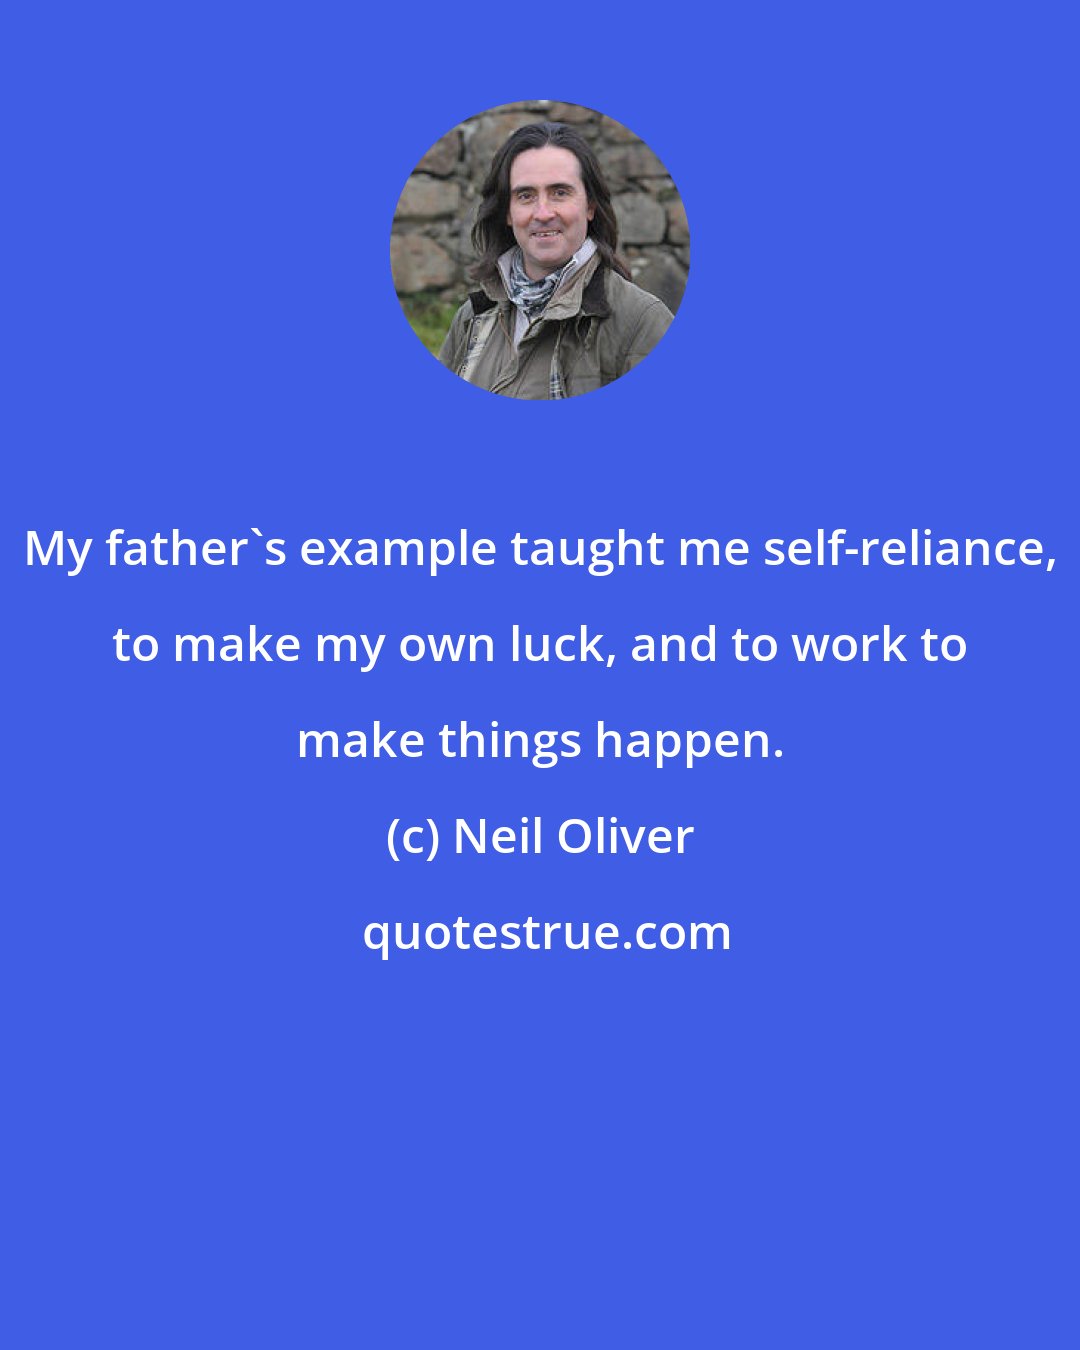 Neil Oliver: My father's example taught me self-reliance, to make my own luck, and to work to make things happen.